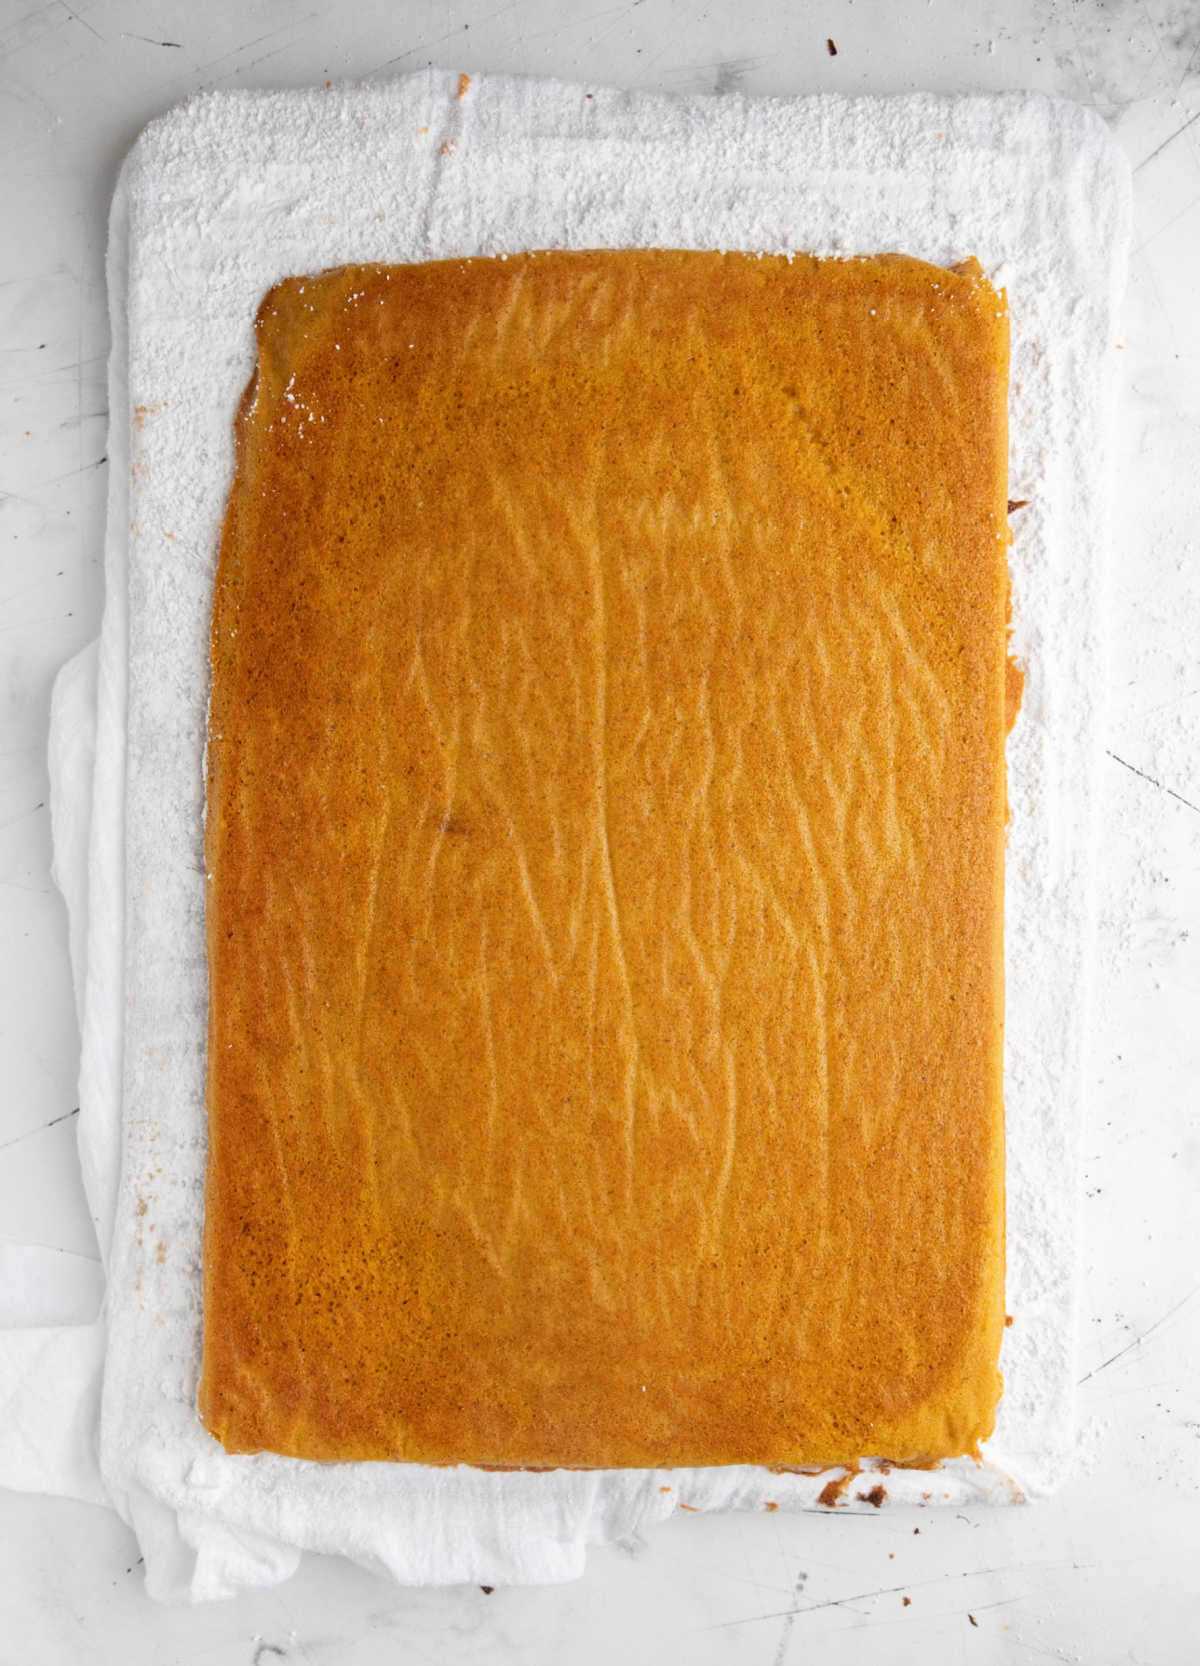 Cooled pumpkin roll unrolled on a flour sack towel. 